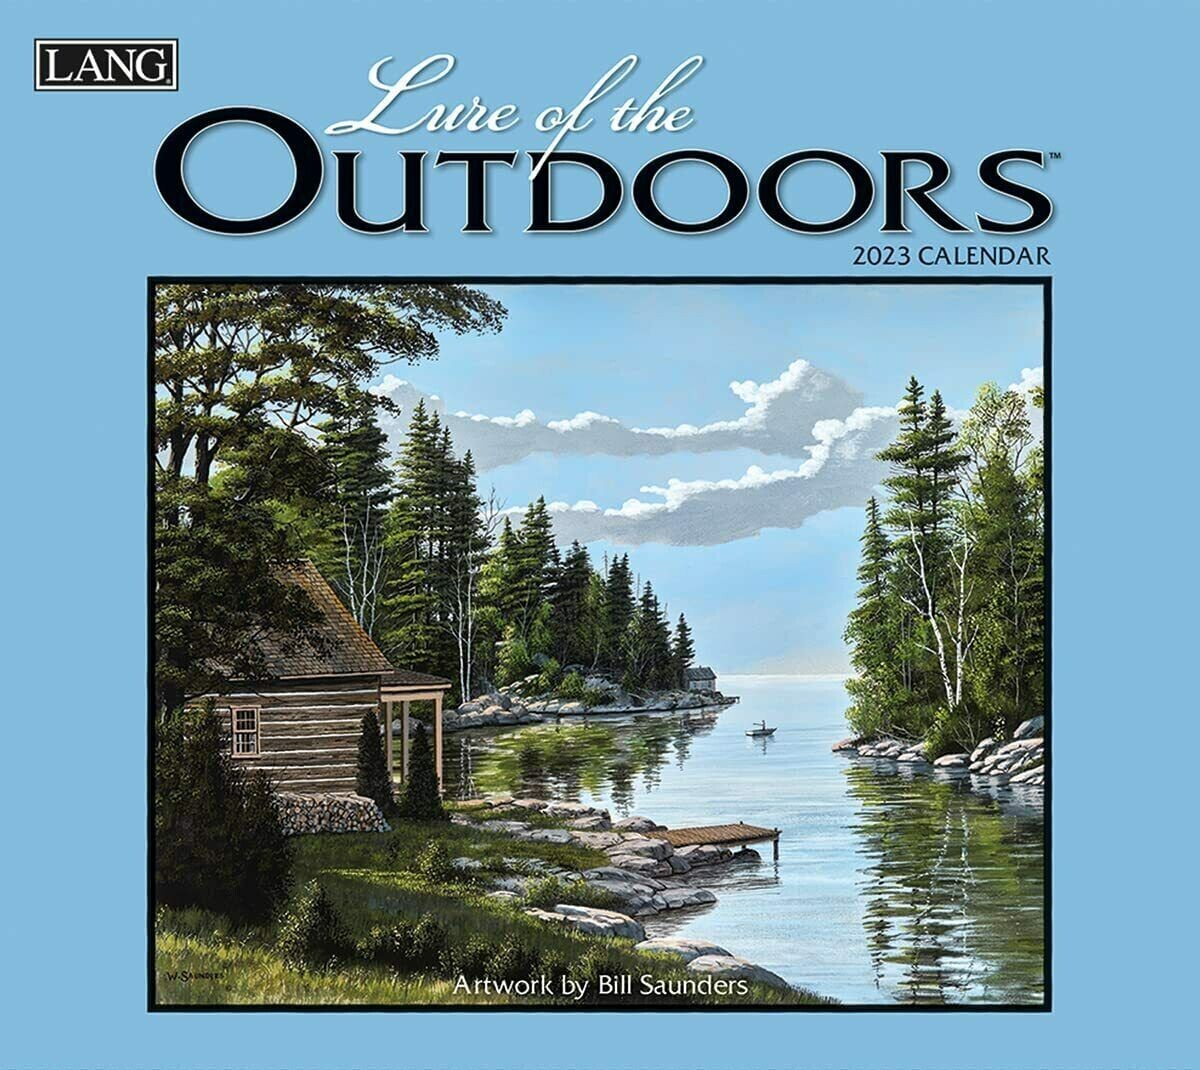 Lang Calendar - Lure of the Outdoors - Bill Saunders